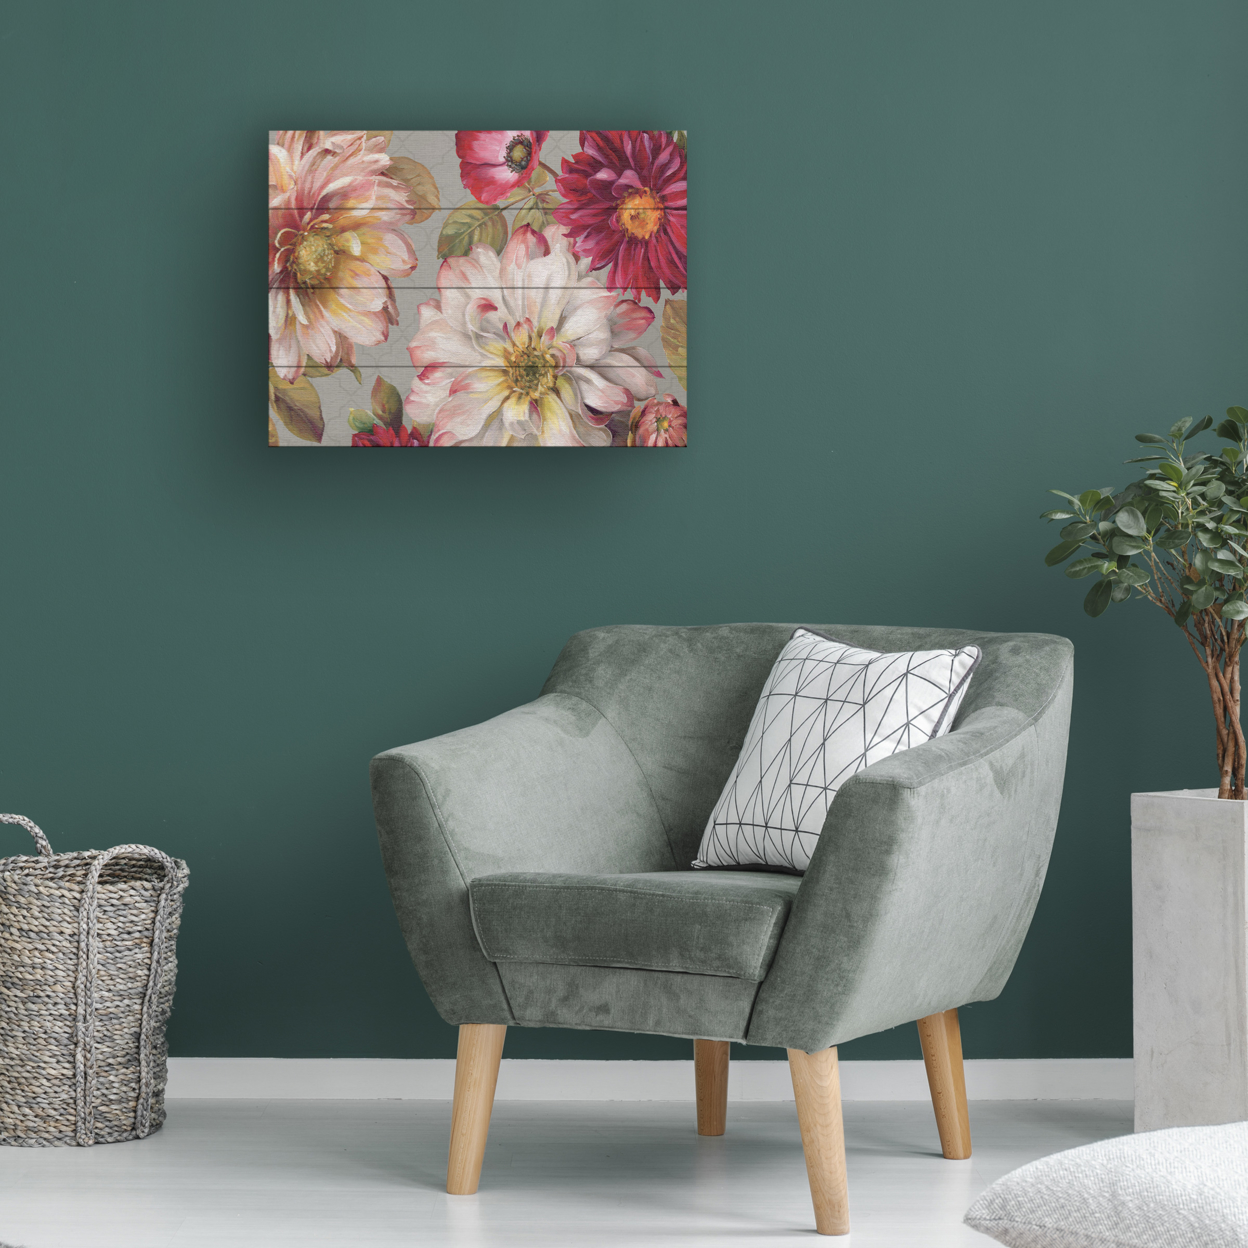 Wall Art 12 X 16 Inches Titled Classically Beautiful I Ready To Hang Printed On Wooden Planks